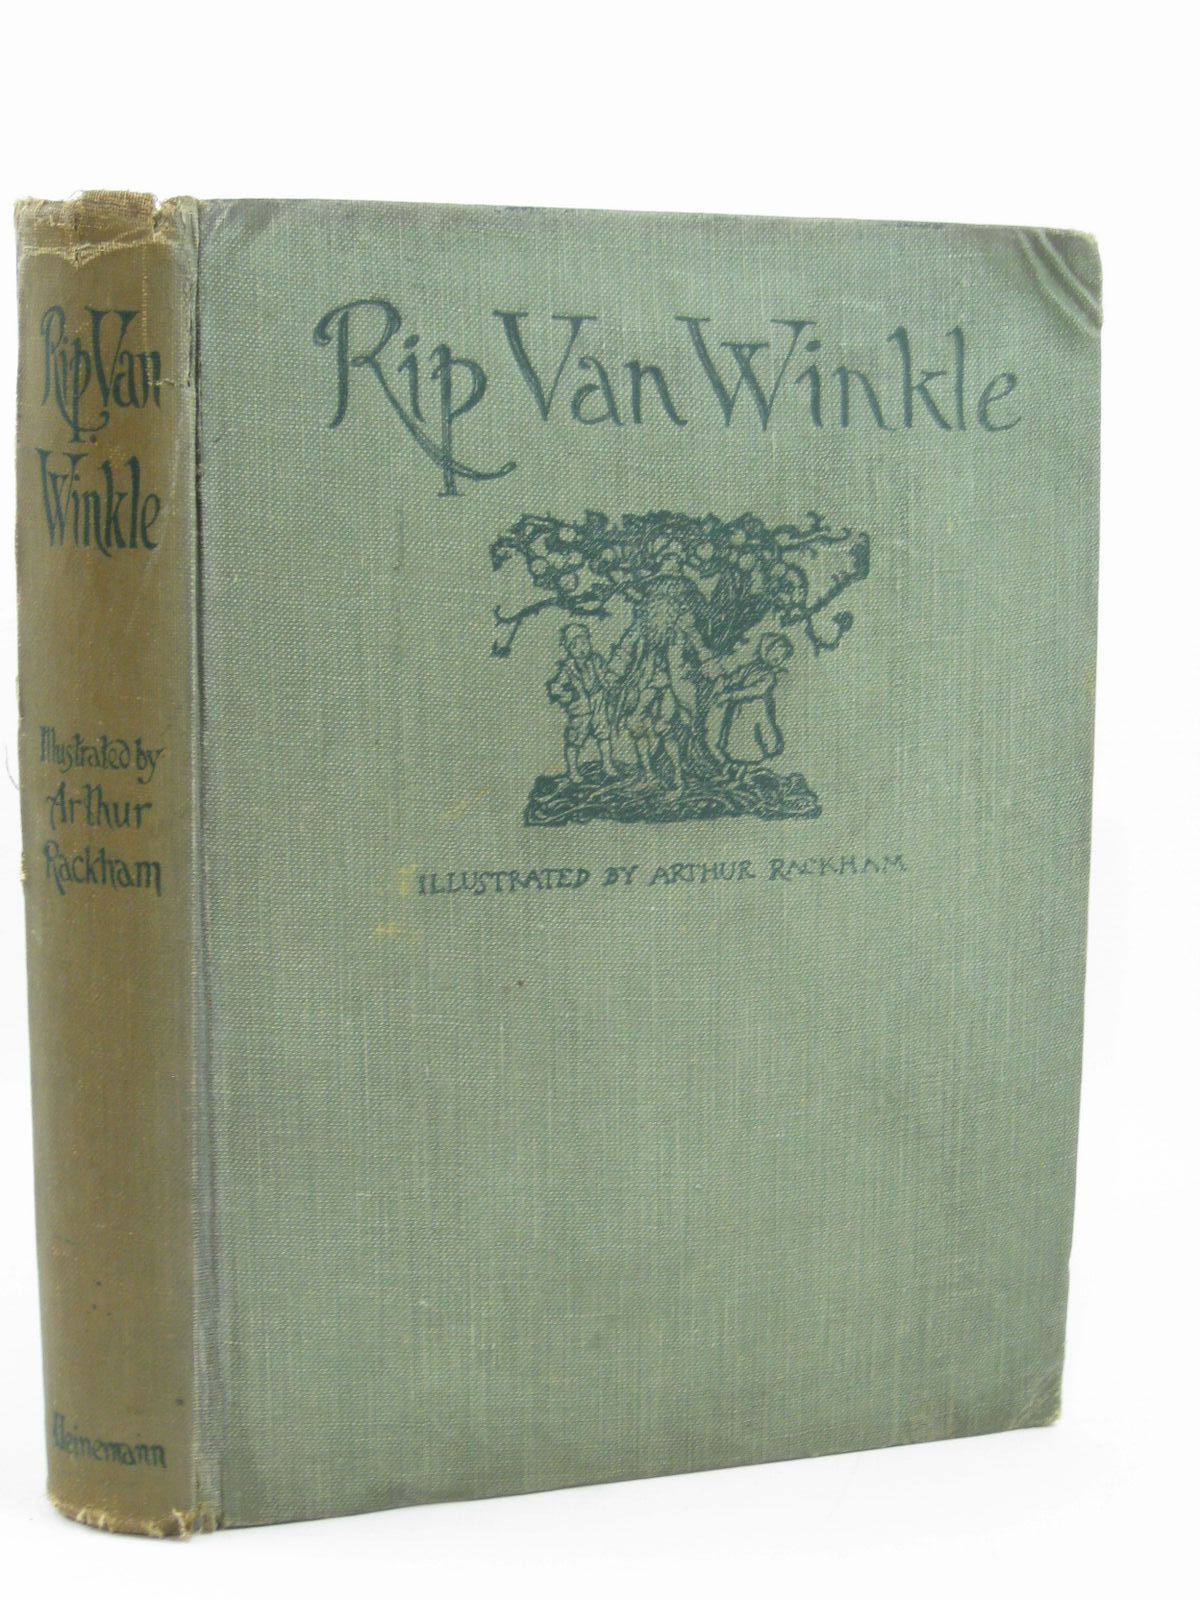 Photo of RIP VAN WINKLE written by Irving, Washington illustrated by Rackham, Arthur published by William Heinemann (STOCK CODE: 1406359)  for sale by Stella & Rose's Books